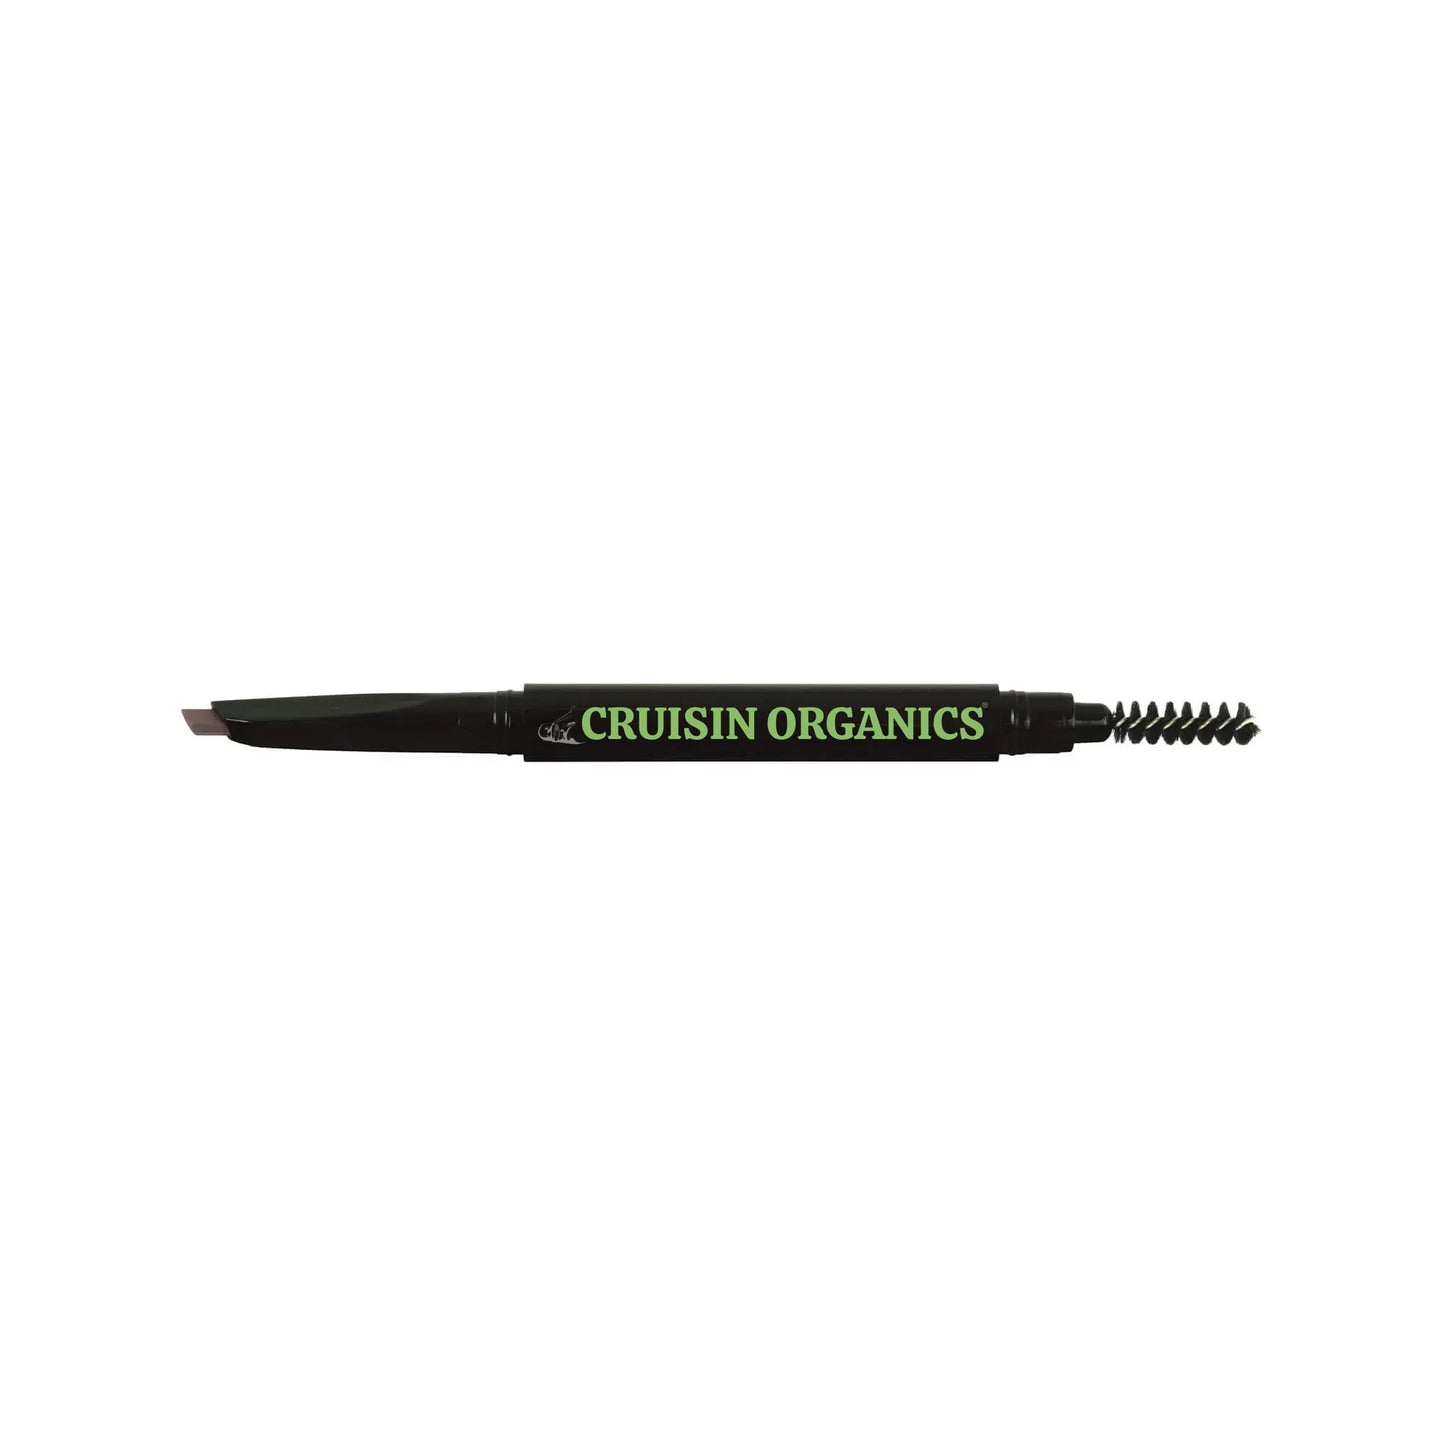 Achieve a full ash brown brow effortlessly with the help of Cruisin Organics' Automatic Eyebrow Pencil. Featuring an angled tip and spooly tip, this dual-tip pencil allows for easy and natural brow shaping. Our all-in-one formula offers color, sculpting, and sealing properties for brows that last. Gently blend the color into your natural brows for a flawless finish